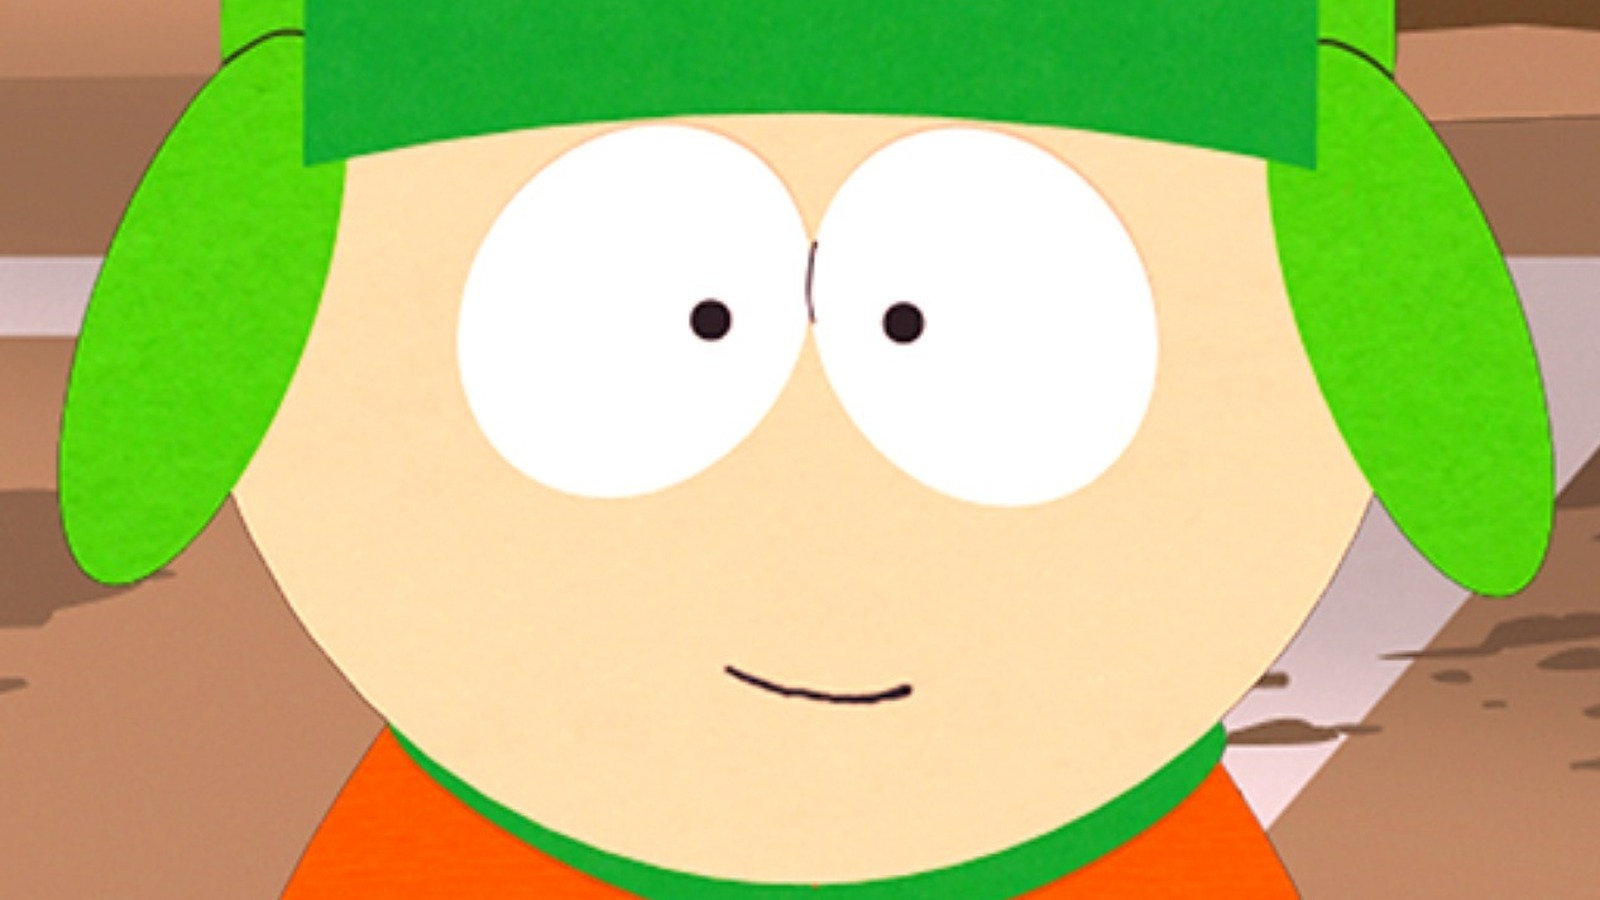 South Park: The Streaming Wars - Part 2: Teaser - Trailers